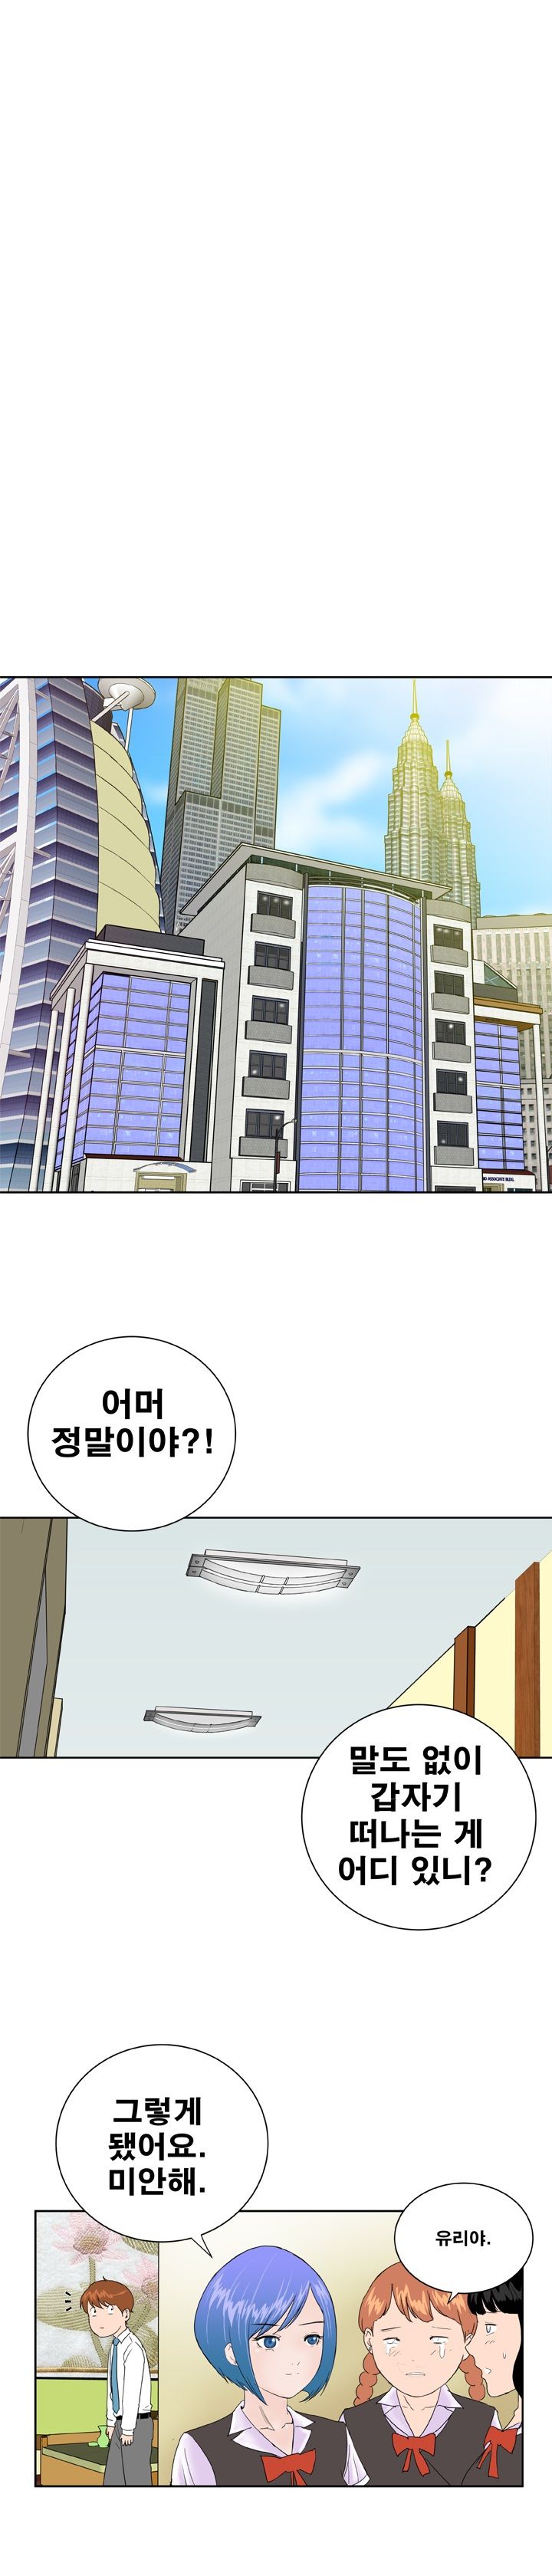 Dream Girl Raw - Chapter 32 Page 2